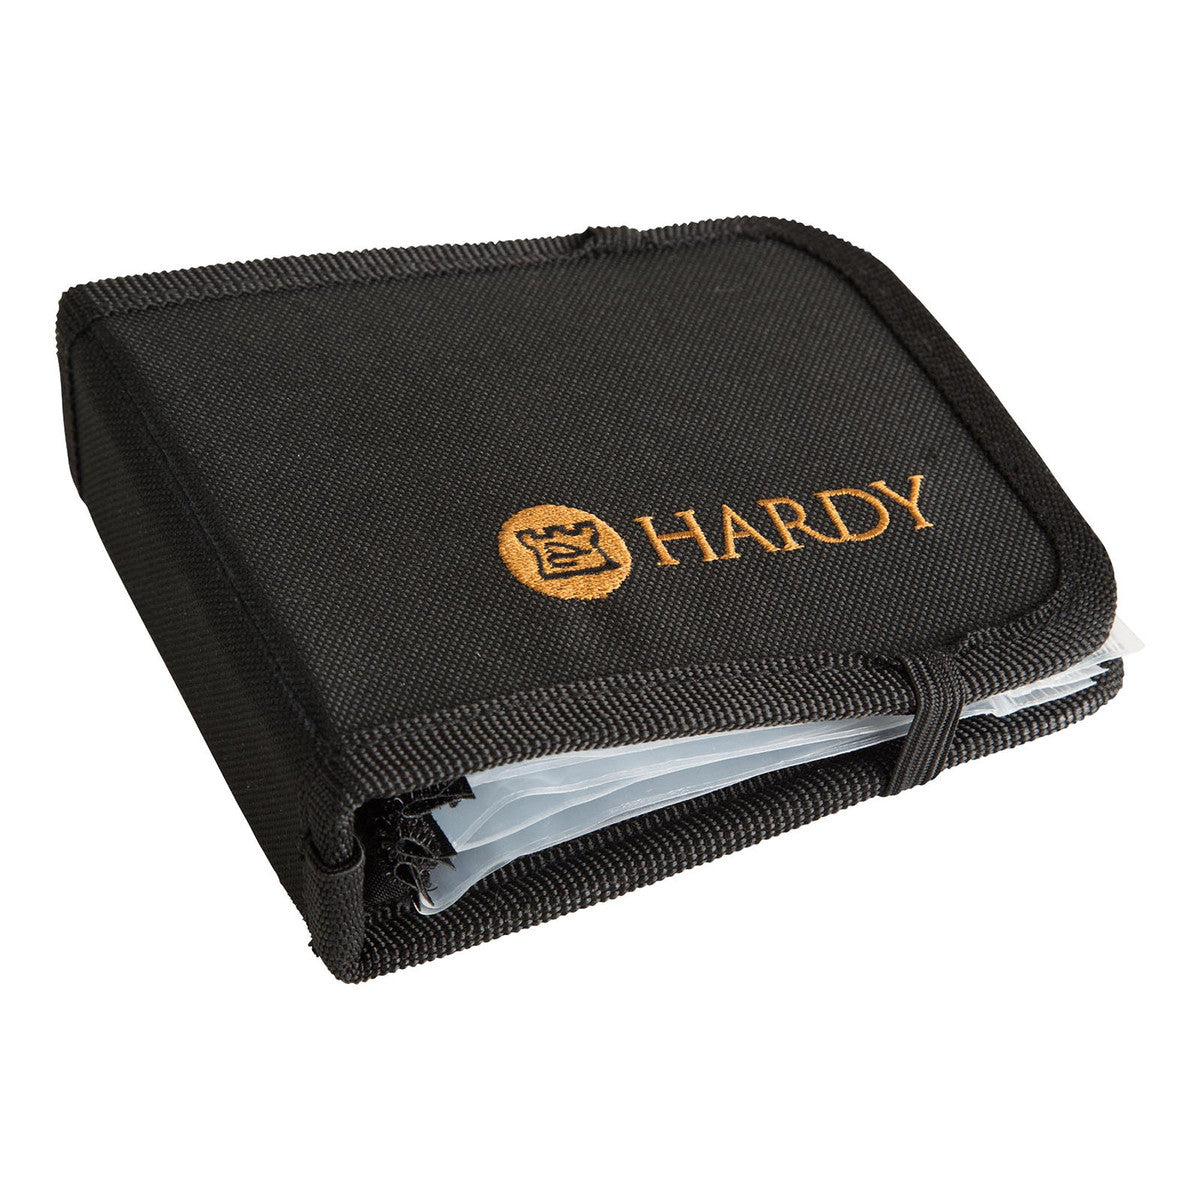 Troutline Mesh fly leader Wallet for fly fishing